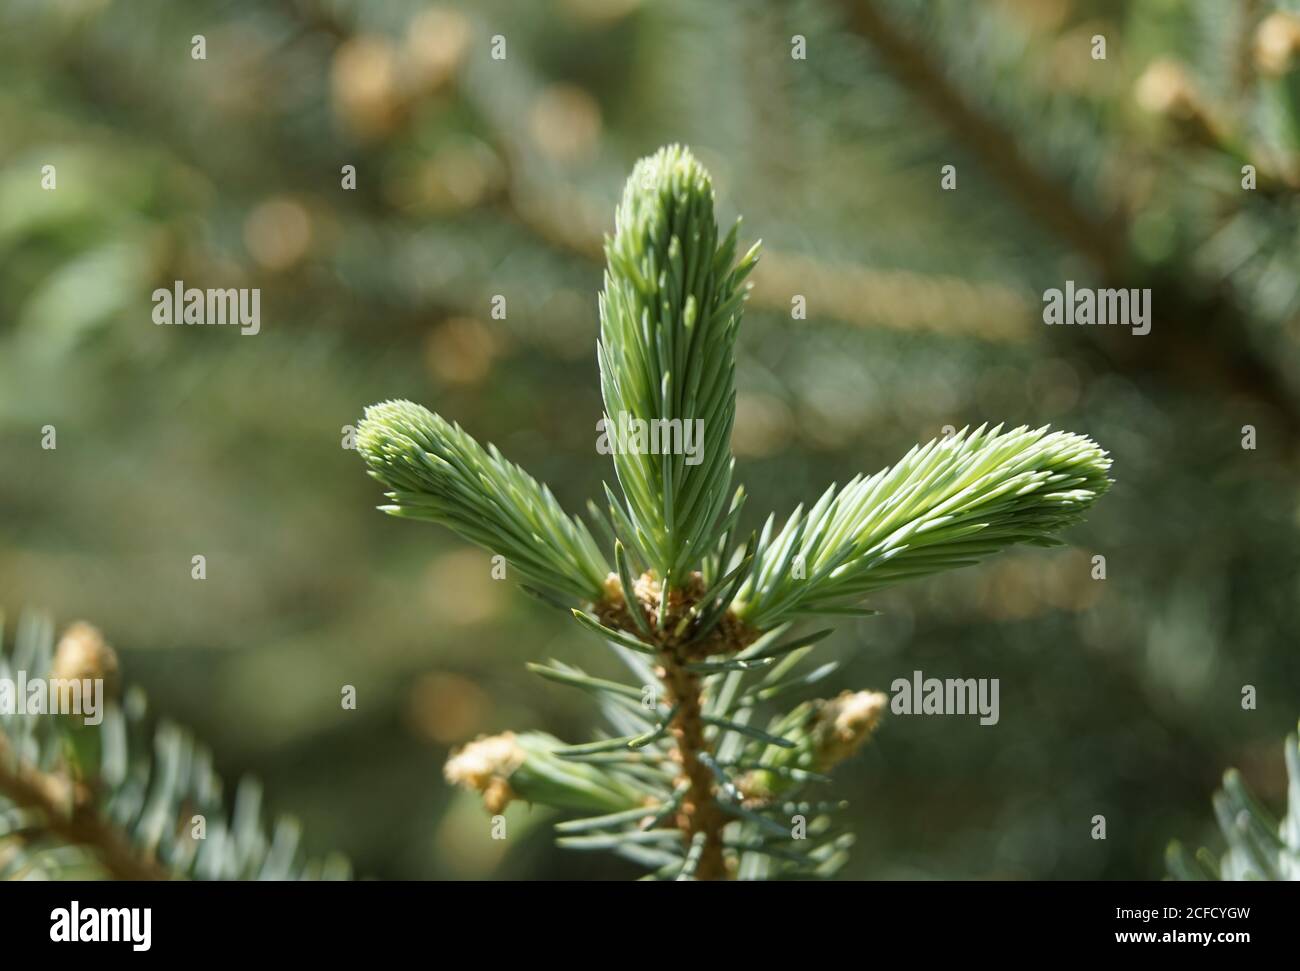 Germany, Bavaria, Upper Bavaria, blue spruce, Picea pungens, branch, first shoot in spring, detail Stock Photo